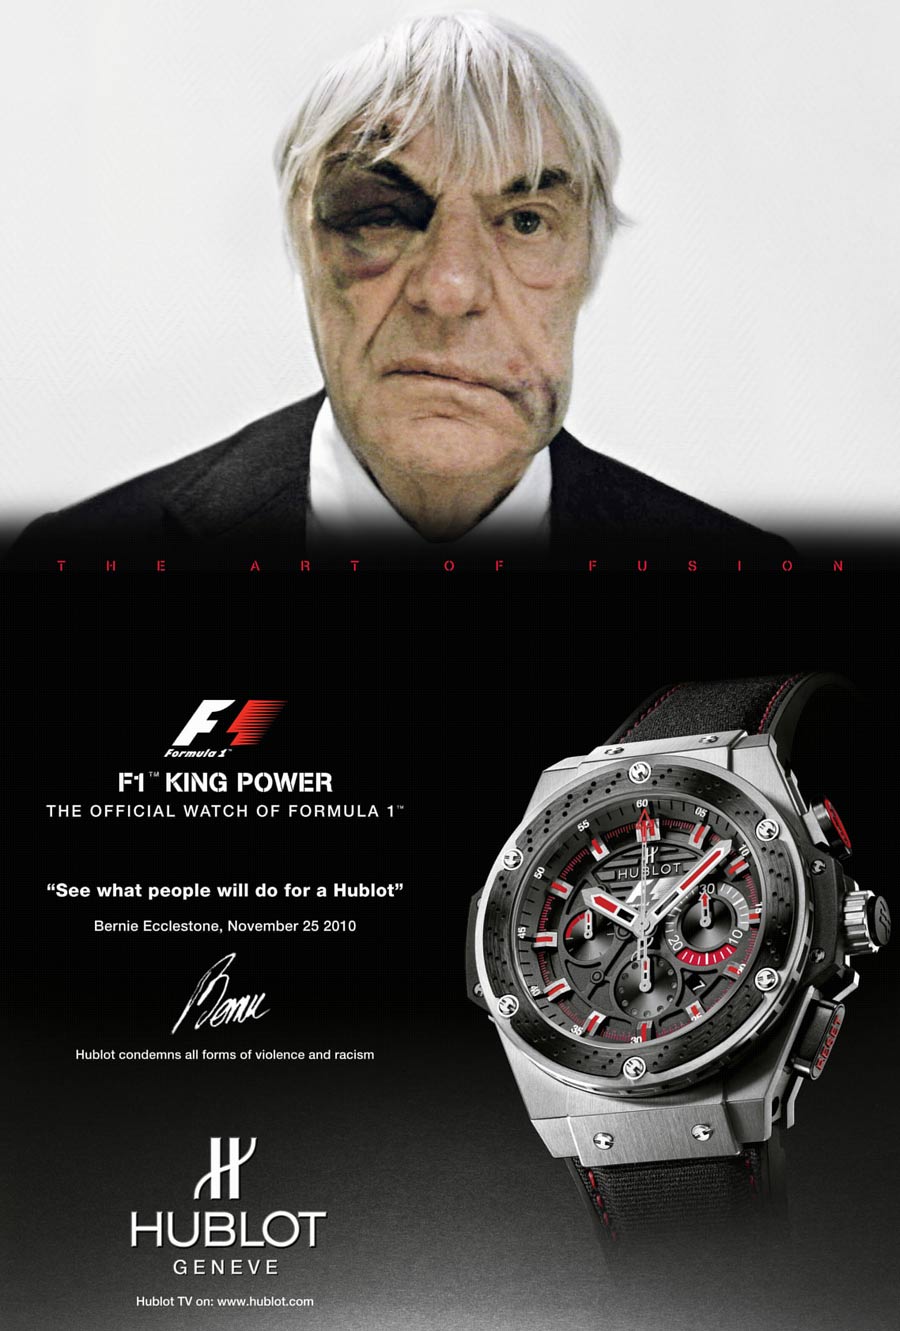 Having been mugged of his Hublot watch in London, Bernie Ecclestone agreed to appear in an advert